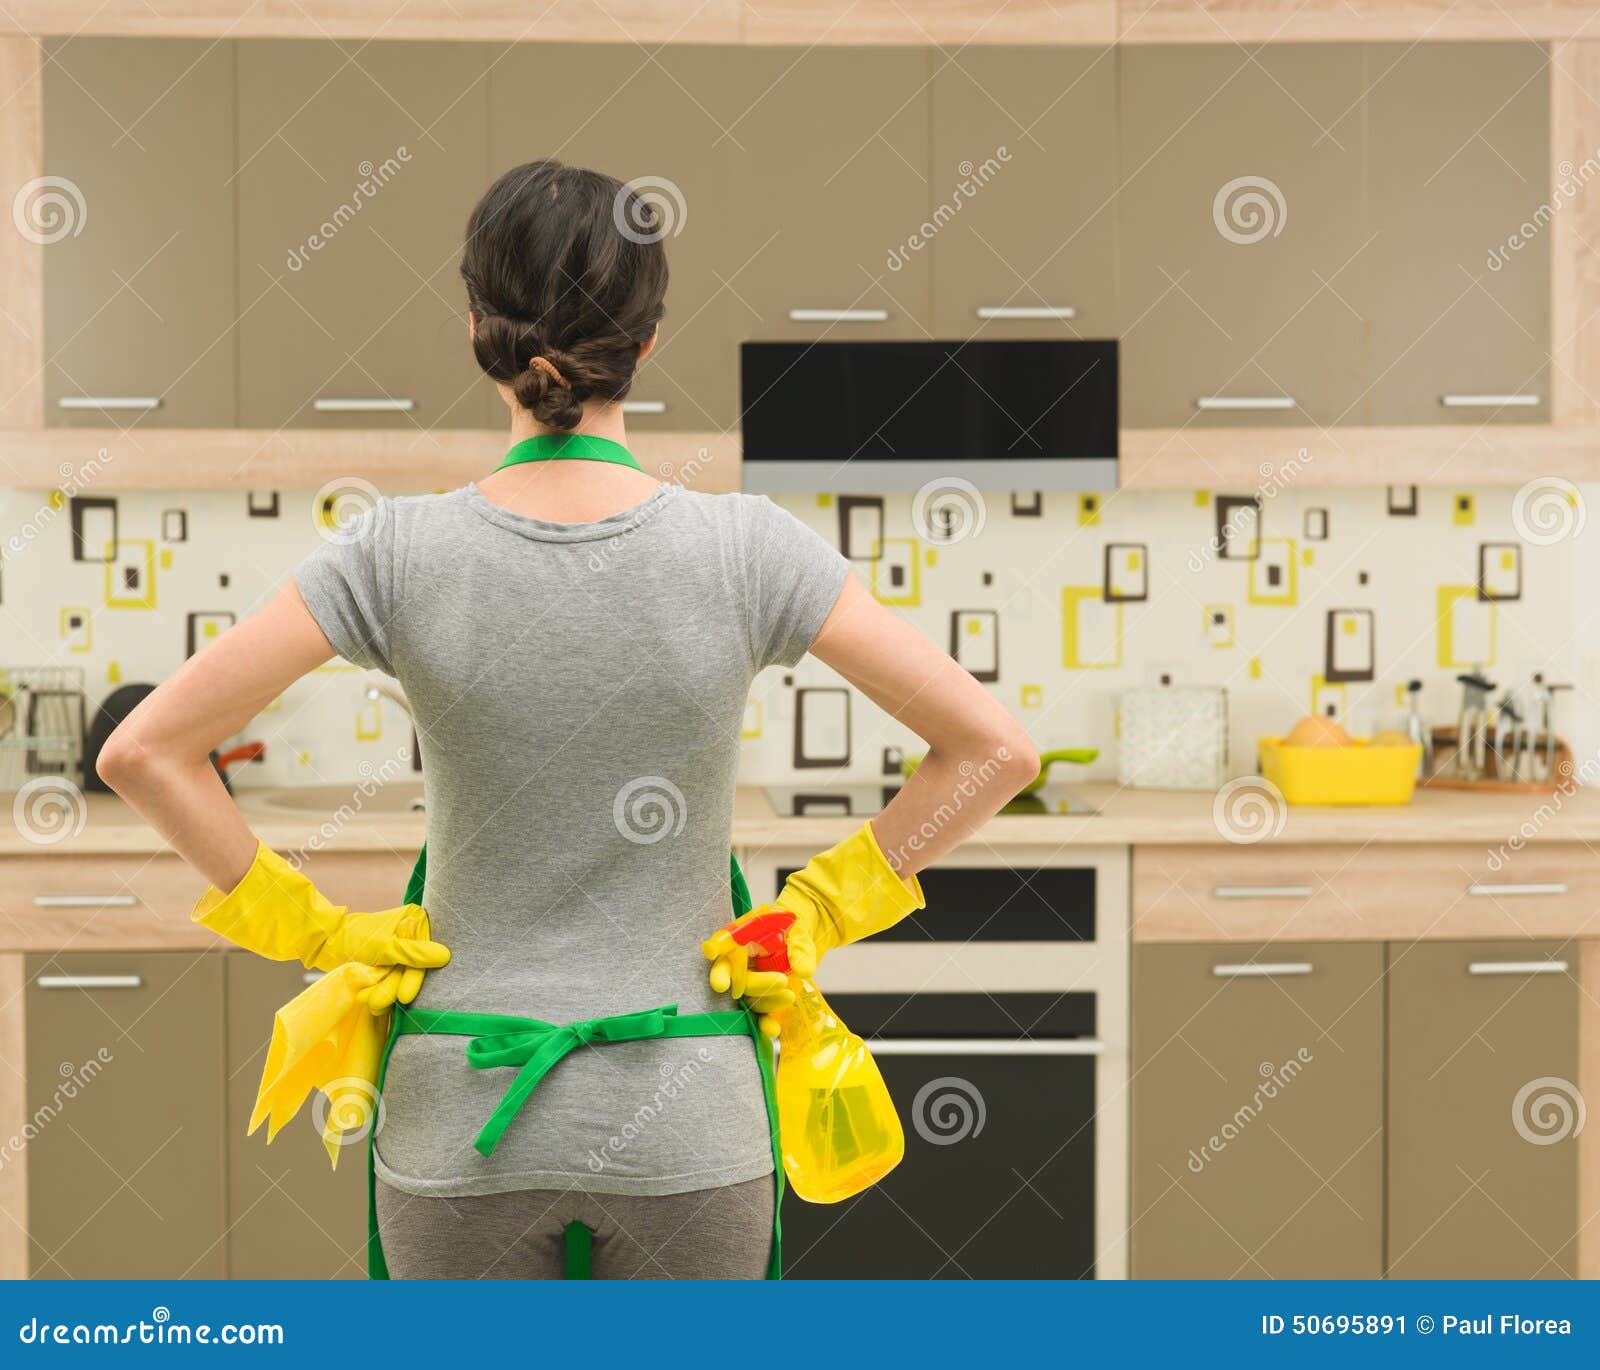 Kitchen Cleaning Stock Image Image Of Cleanup Cleaner 50695